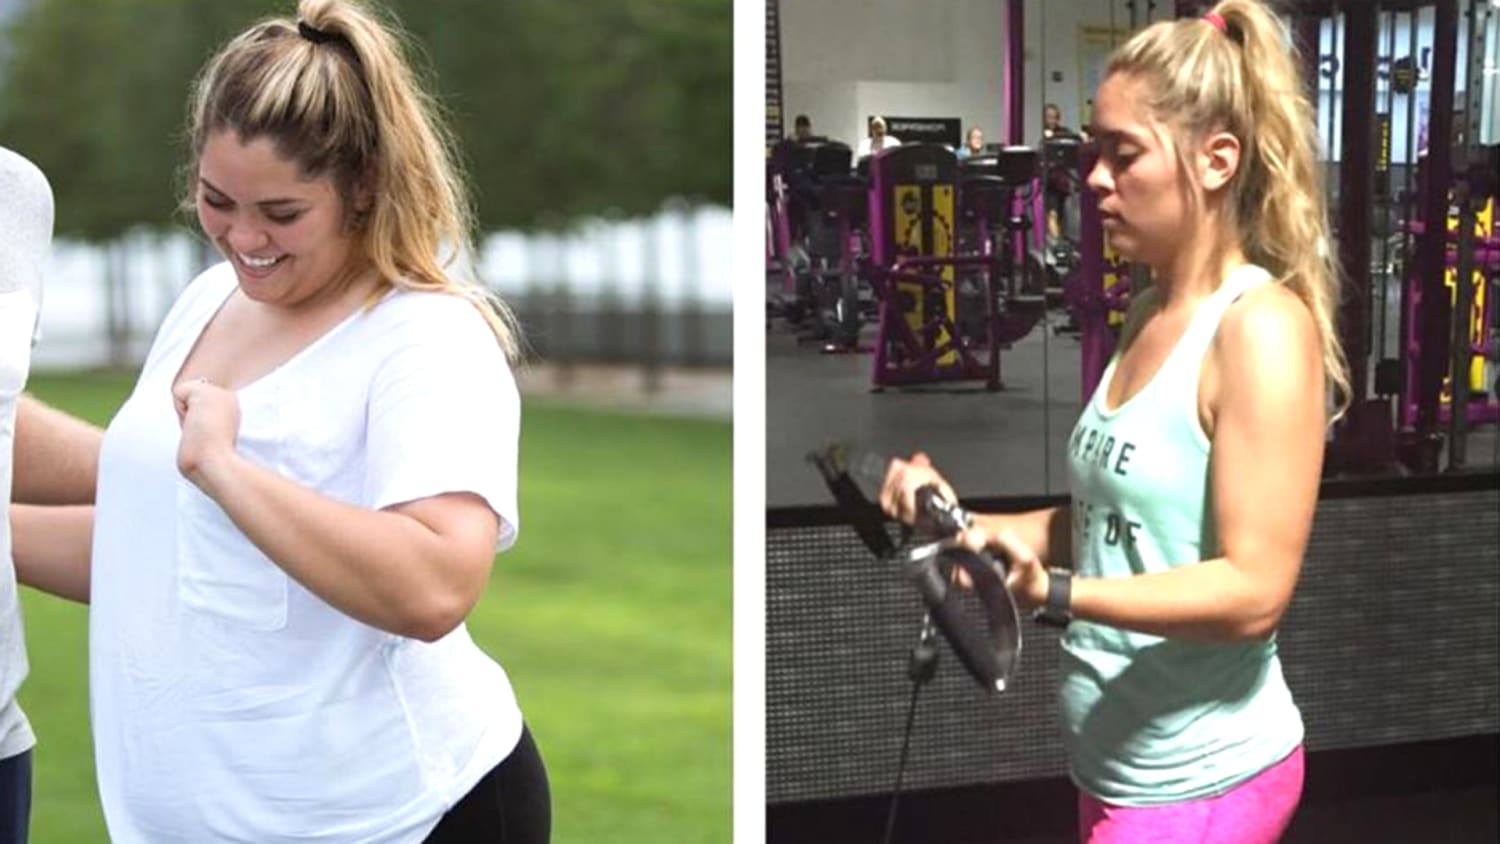 Weight loss: 8 steps that helped this bride lose 110 pounds.